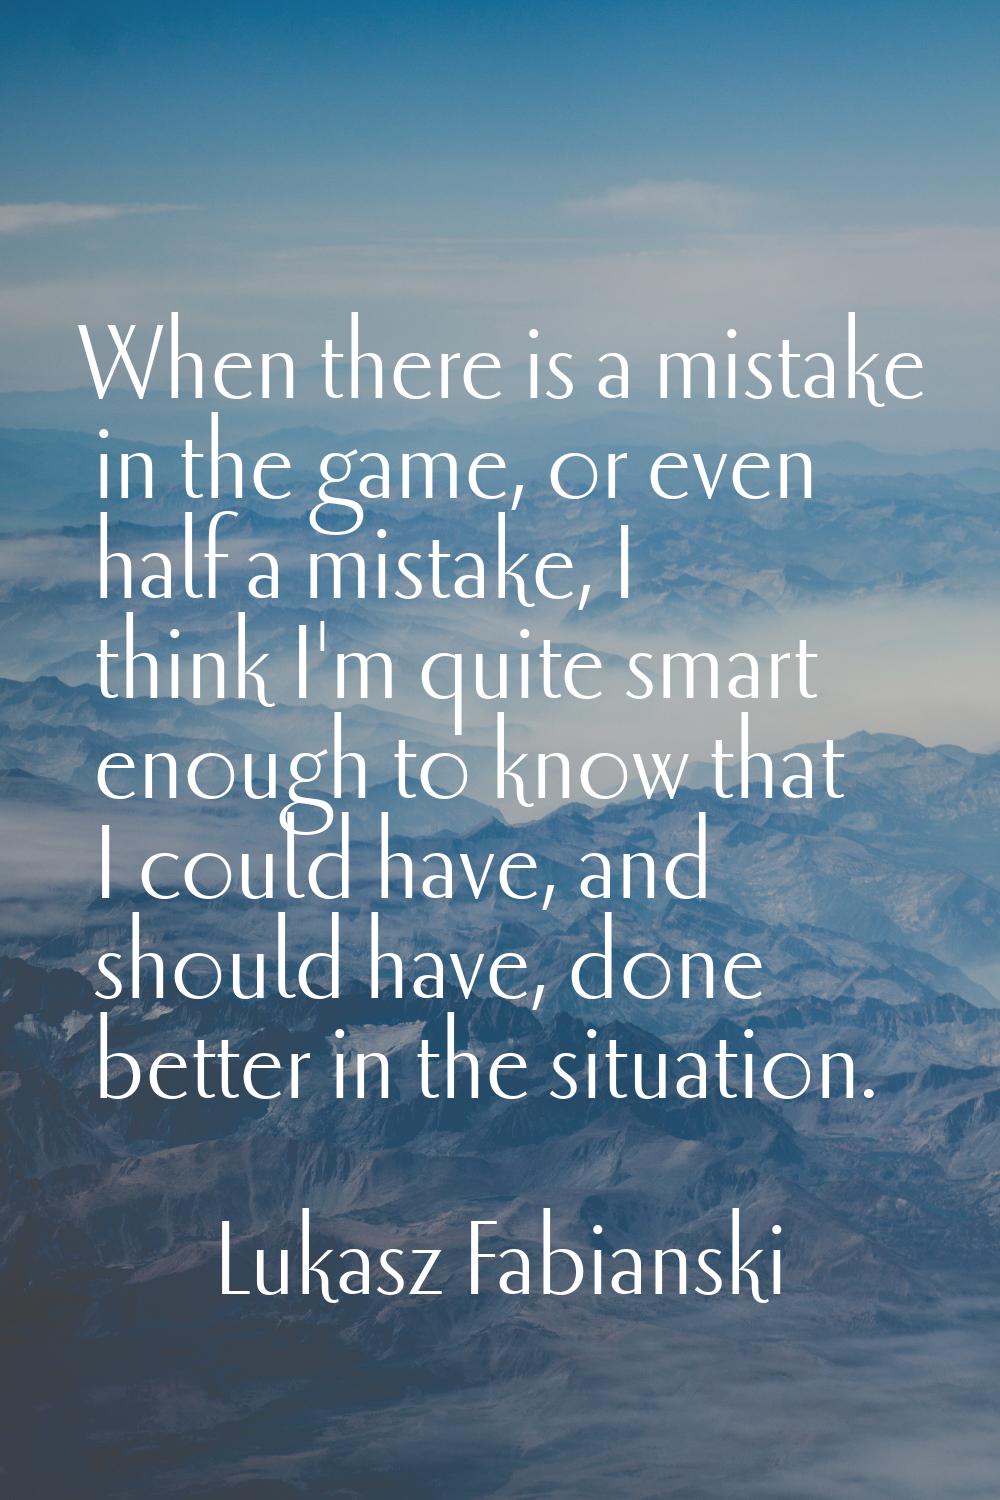 When there is a mistake in the game, or even half a mistake, I think I'm quite smart enough to know